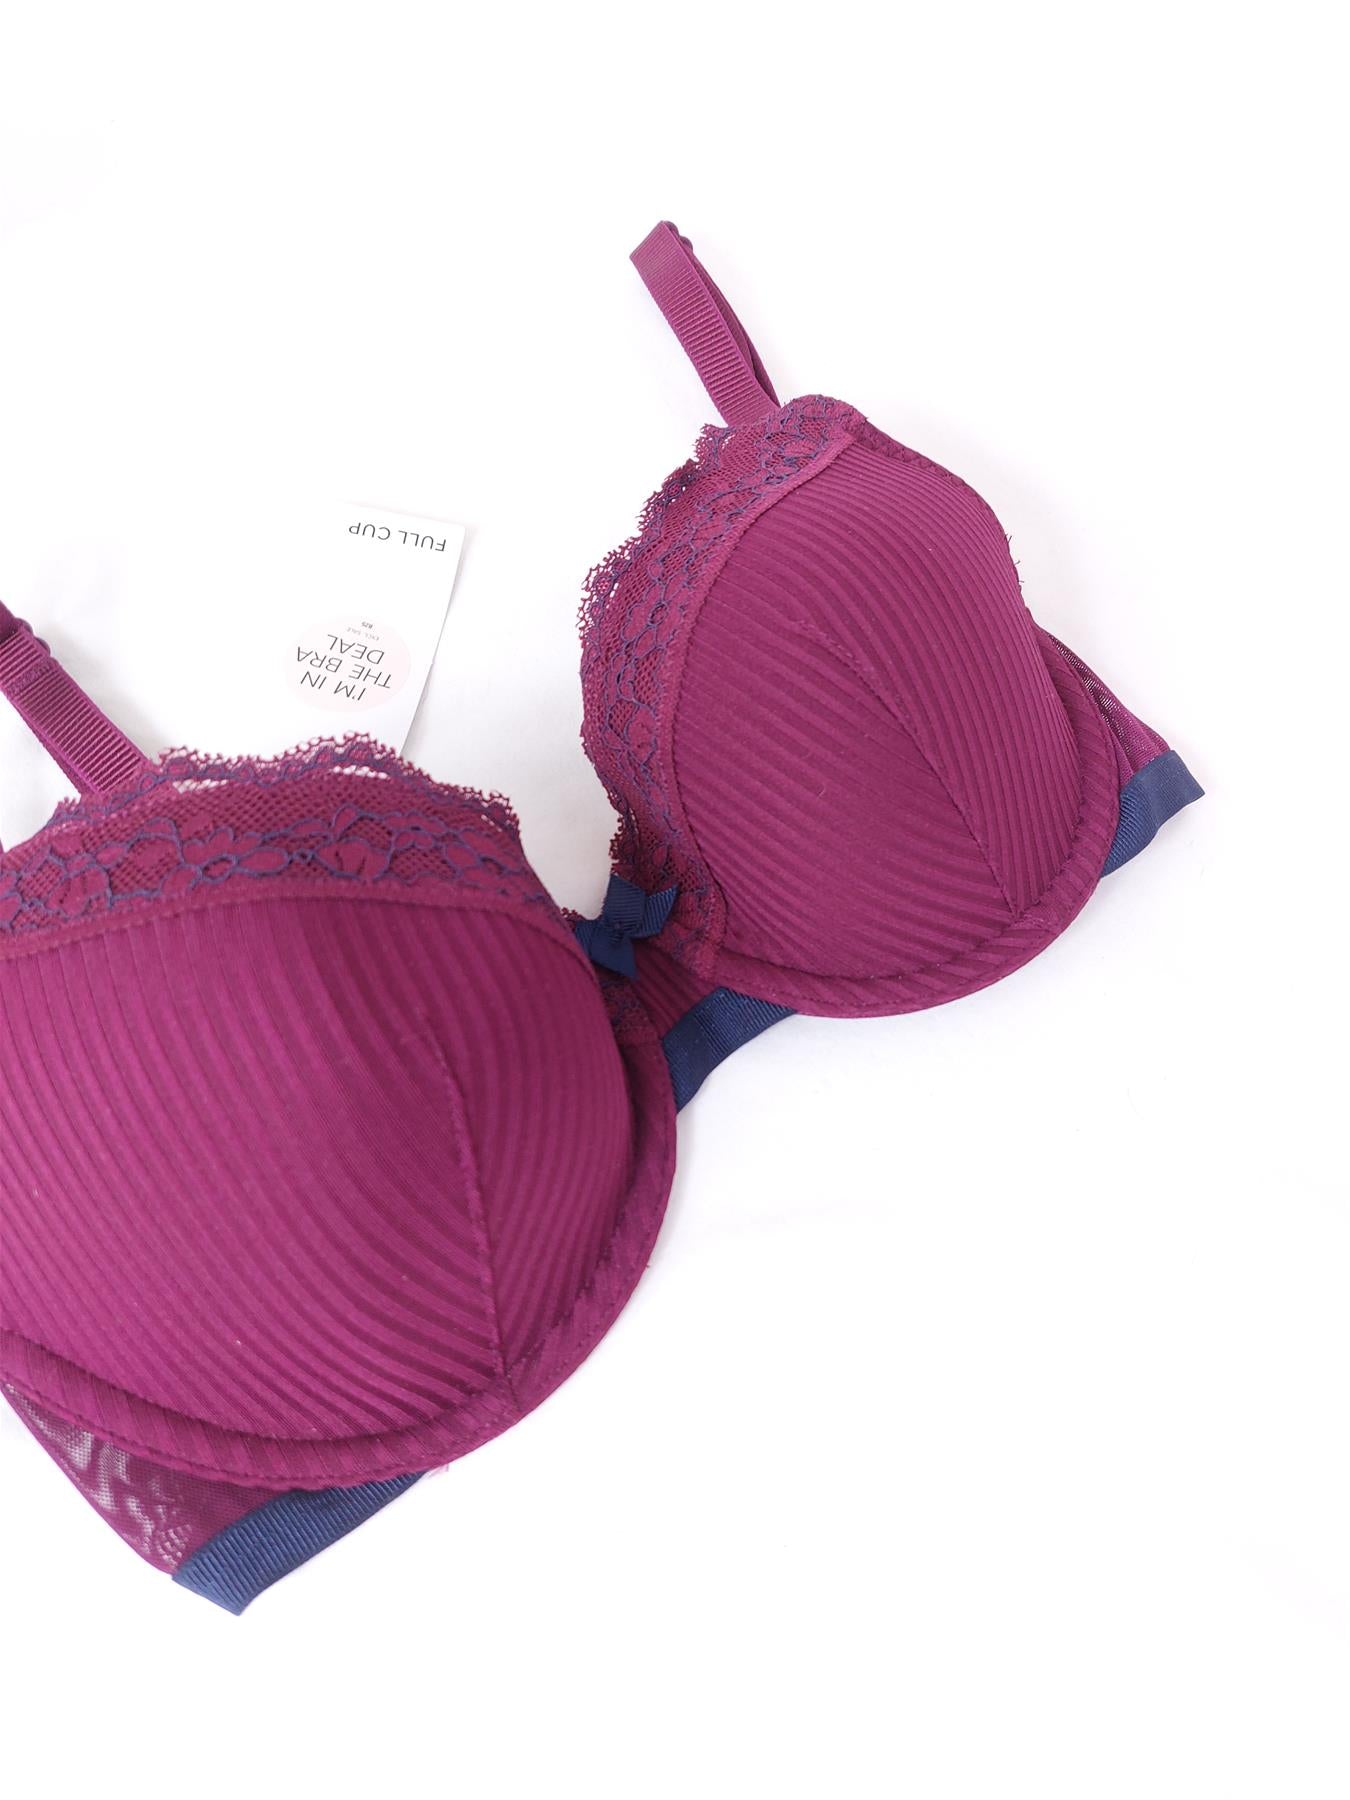 Full Cup Bra with Lace Trim Padded Underwired Brand New